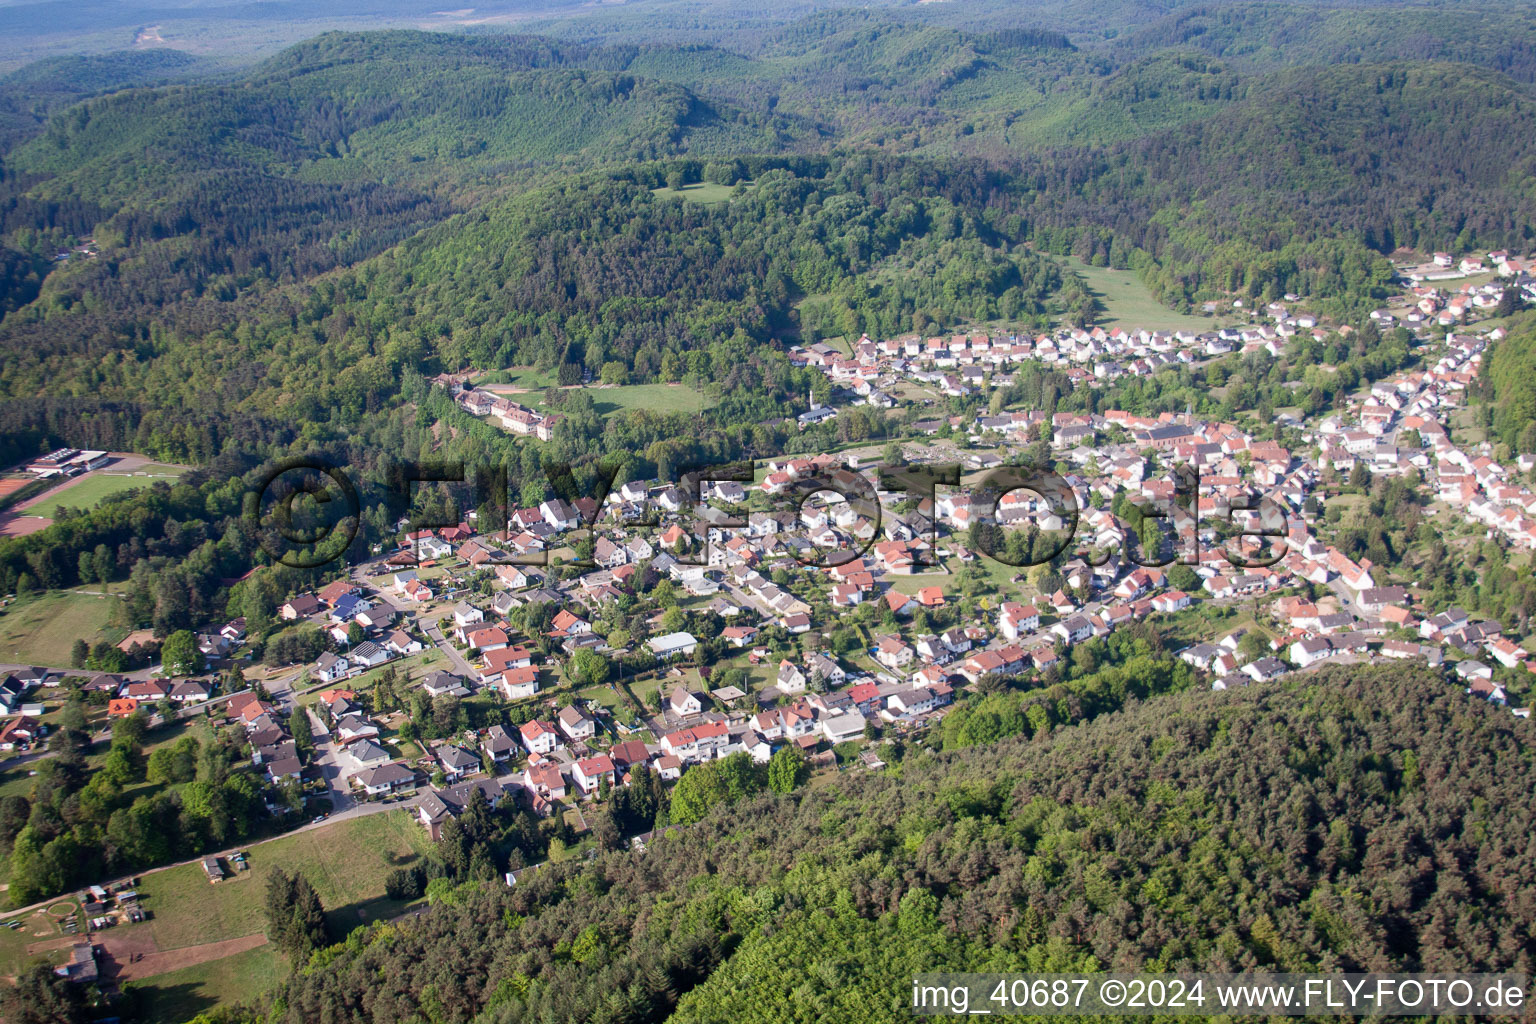 Village view in Eppenbrunn in the state Rhineland-Palatinate